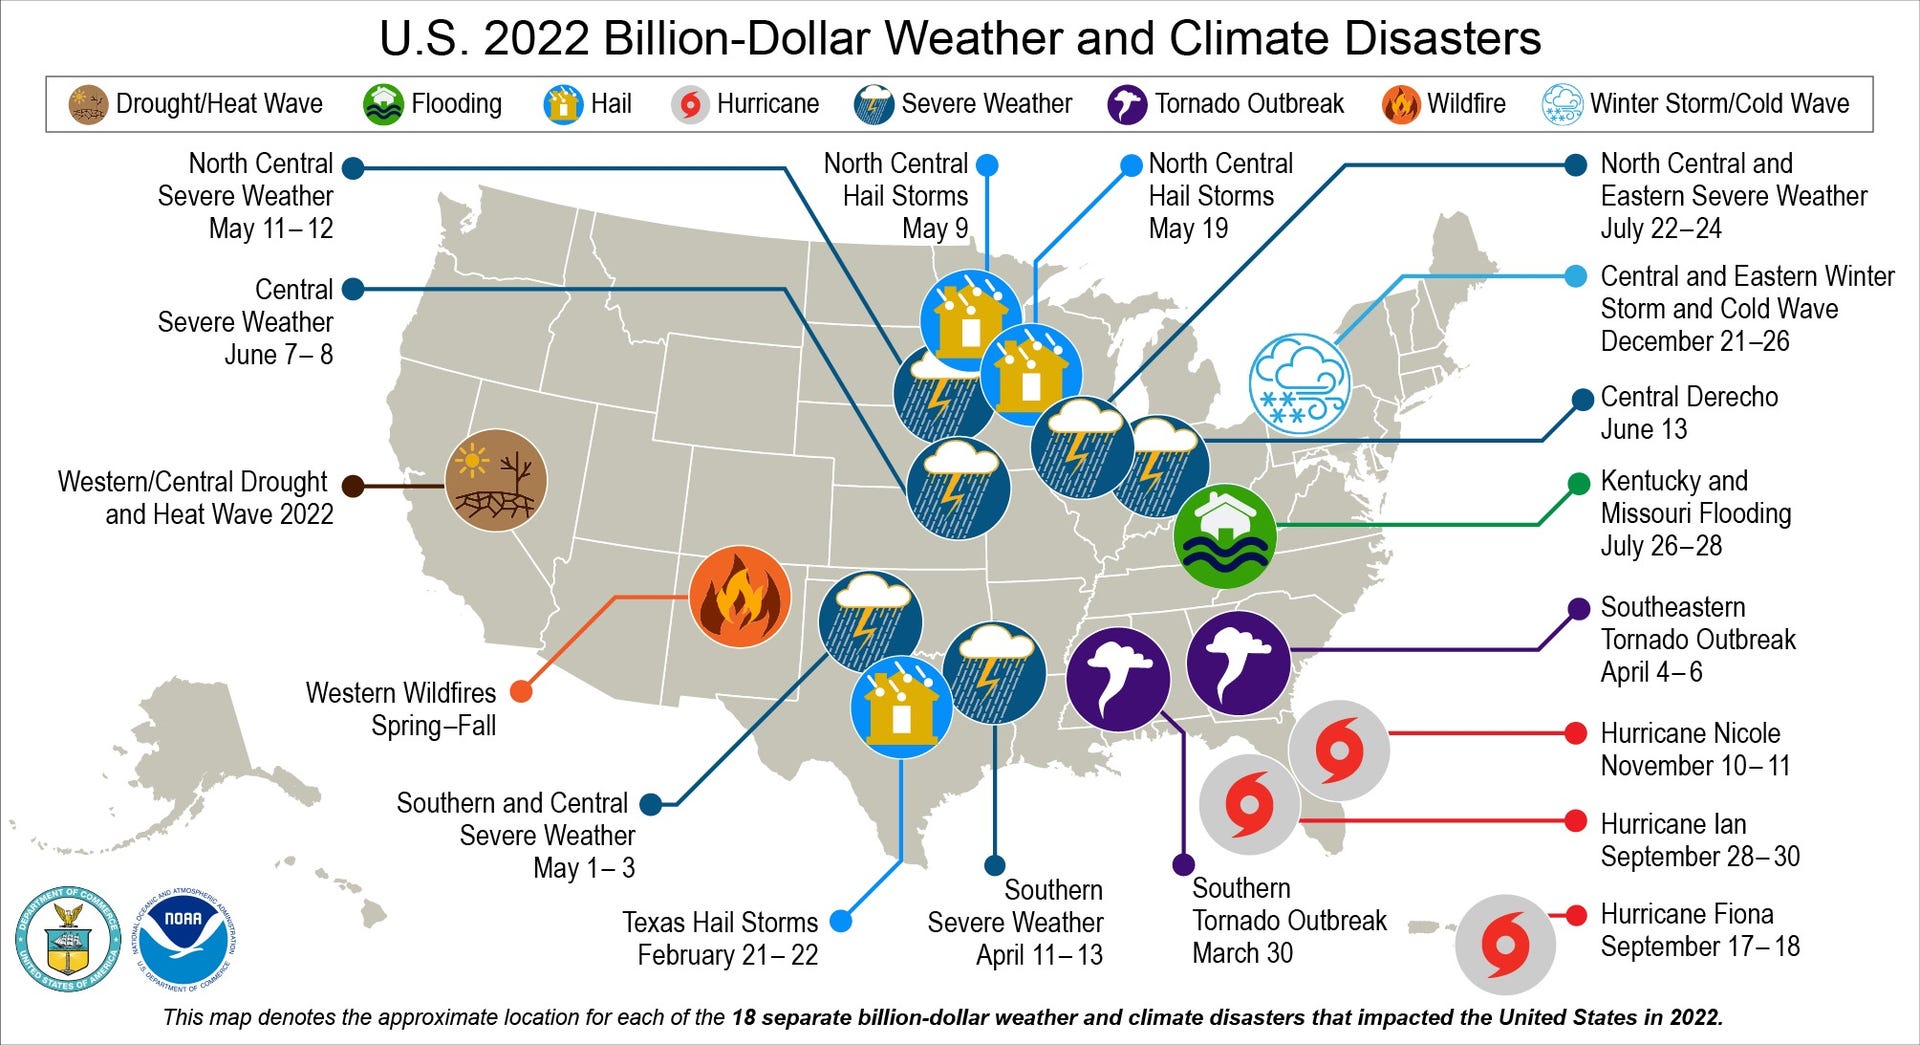 Map of the US with round symbols noting the locations of 18 billion-dollar disasters ranging from hurricanes to wildfire.